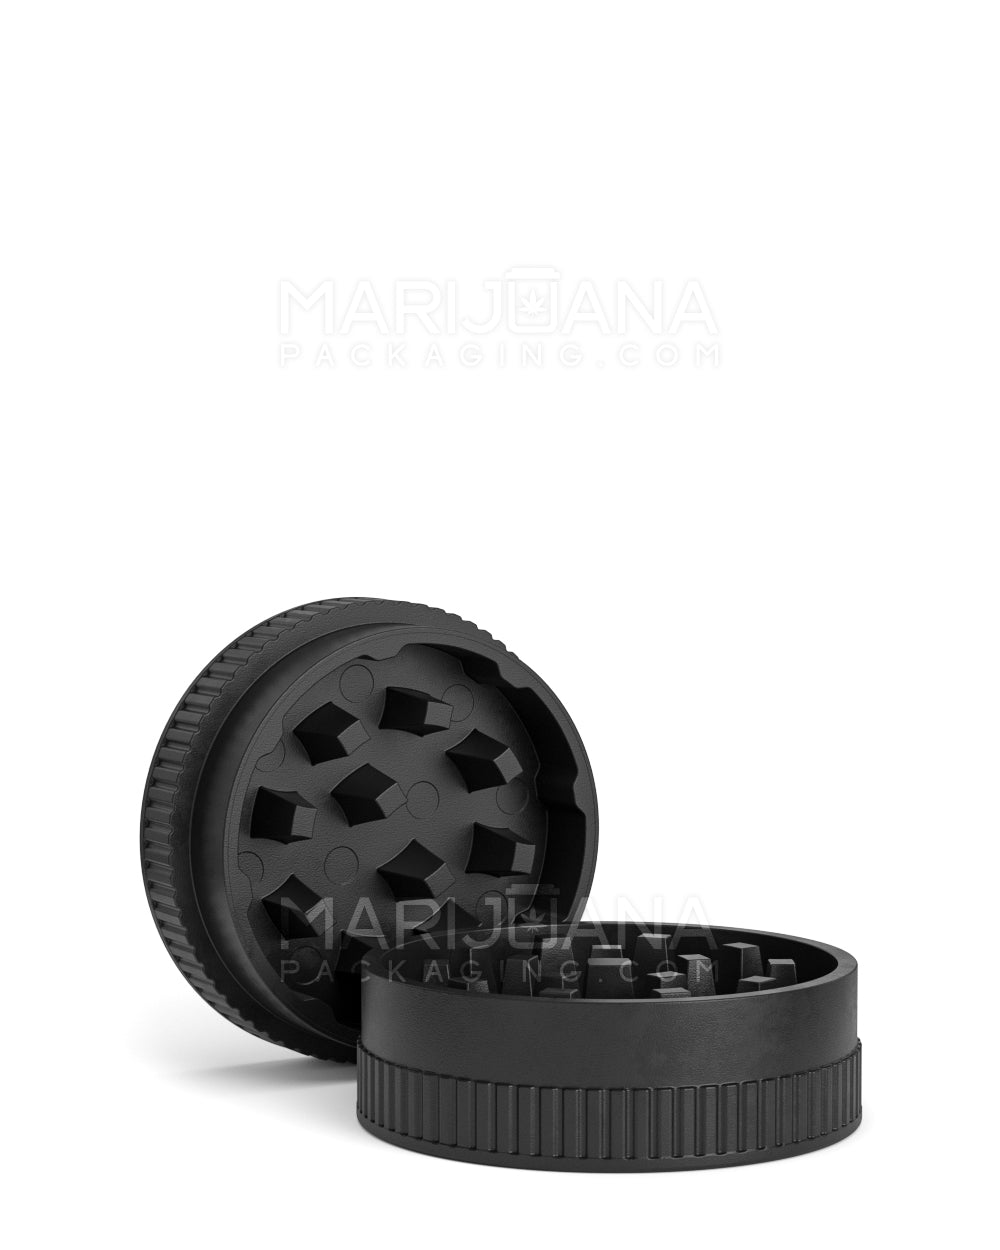 Biodegradable Thick Wall Black Grinder | 2 Piece - 55mm - 12 Count - 5